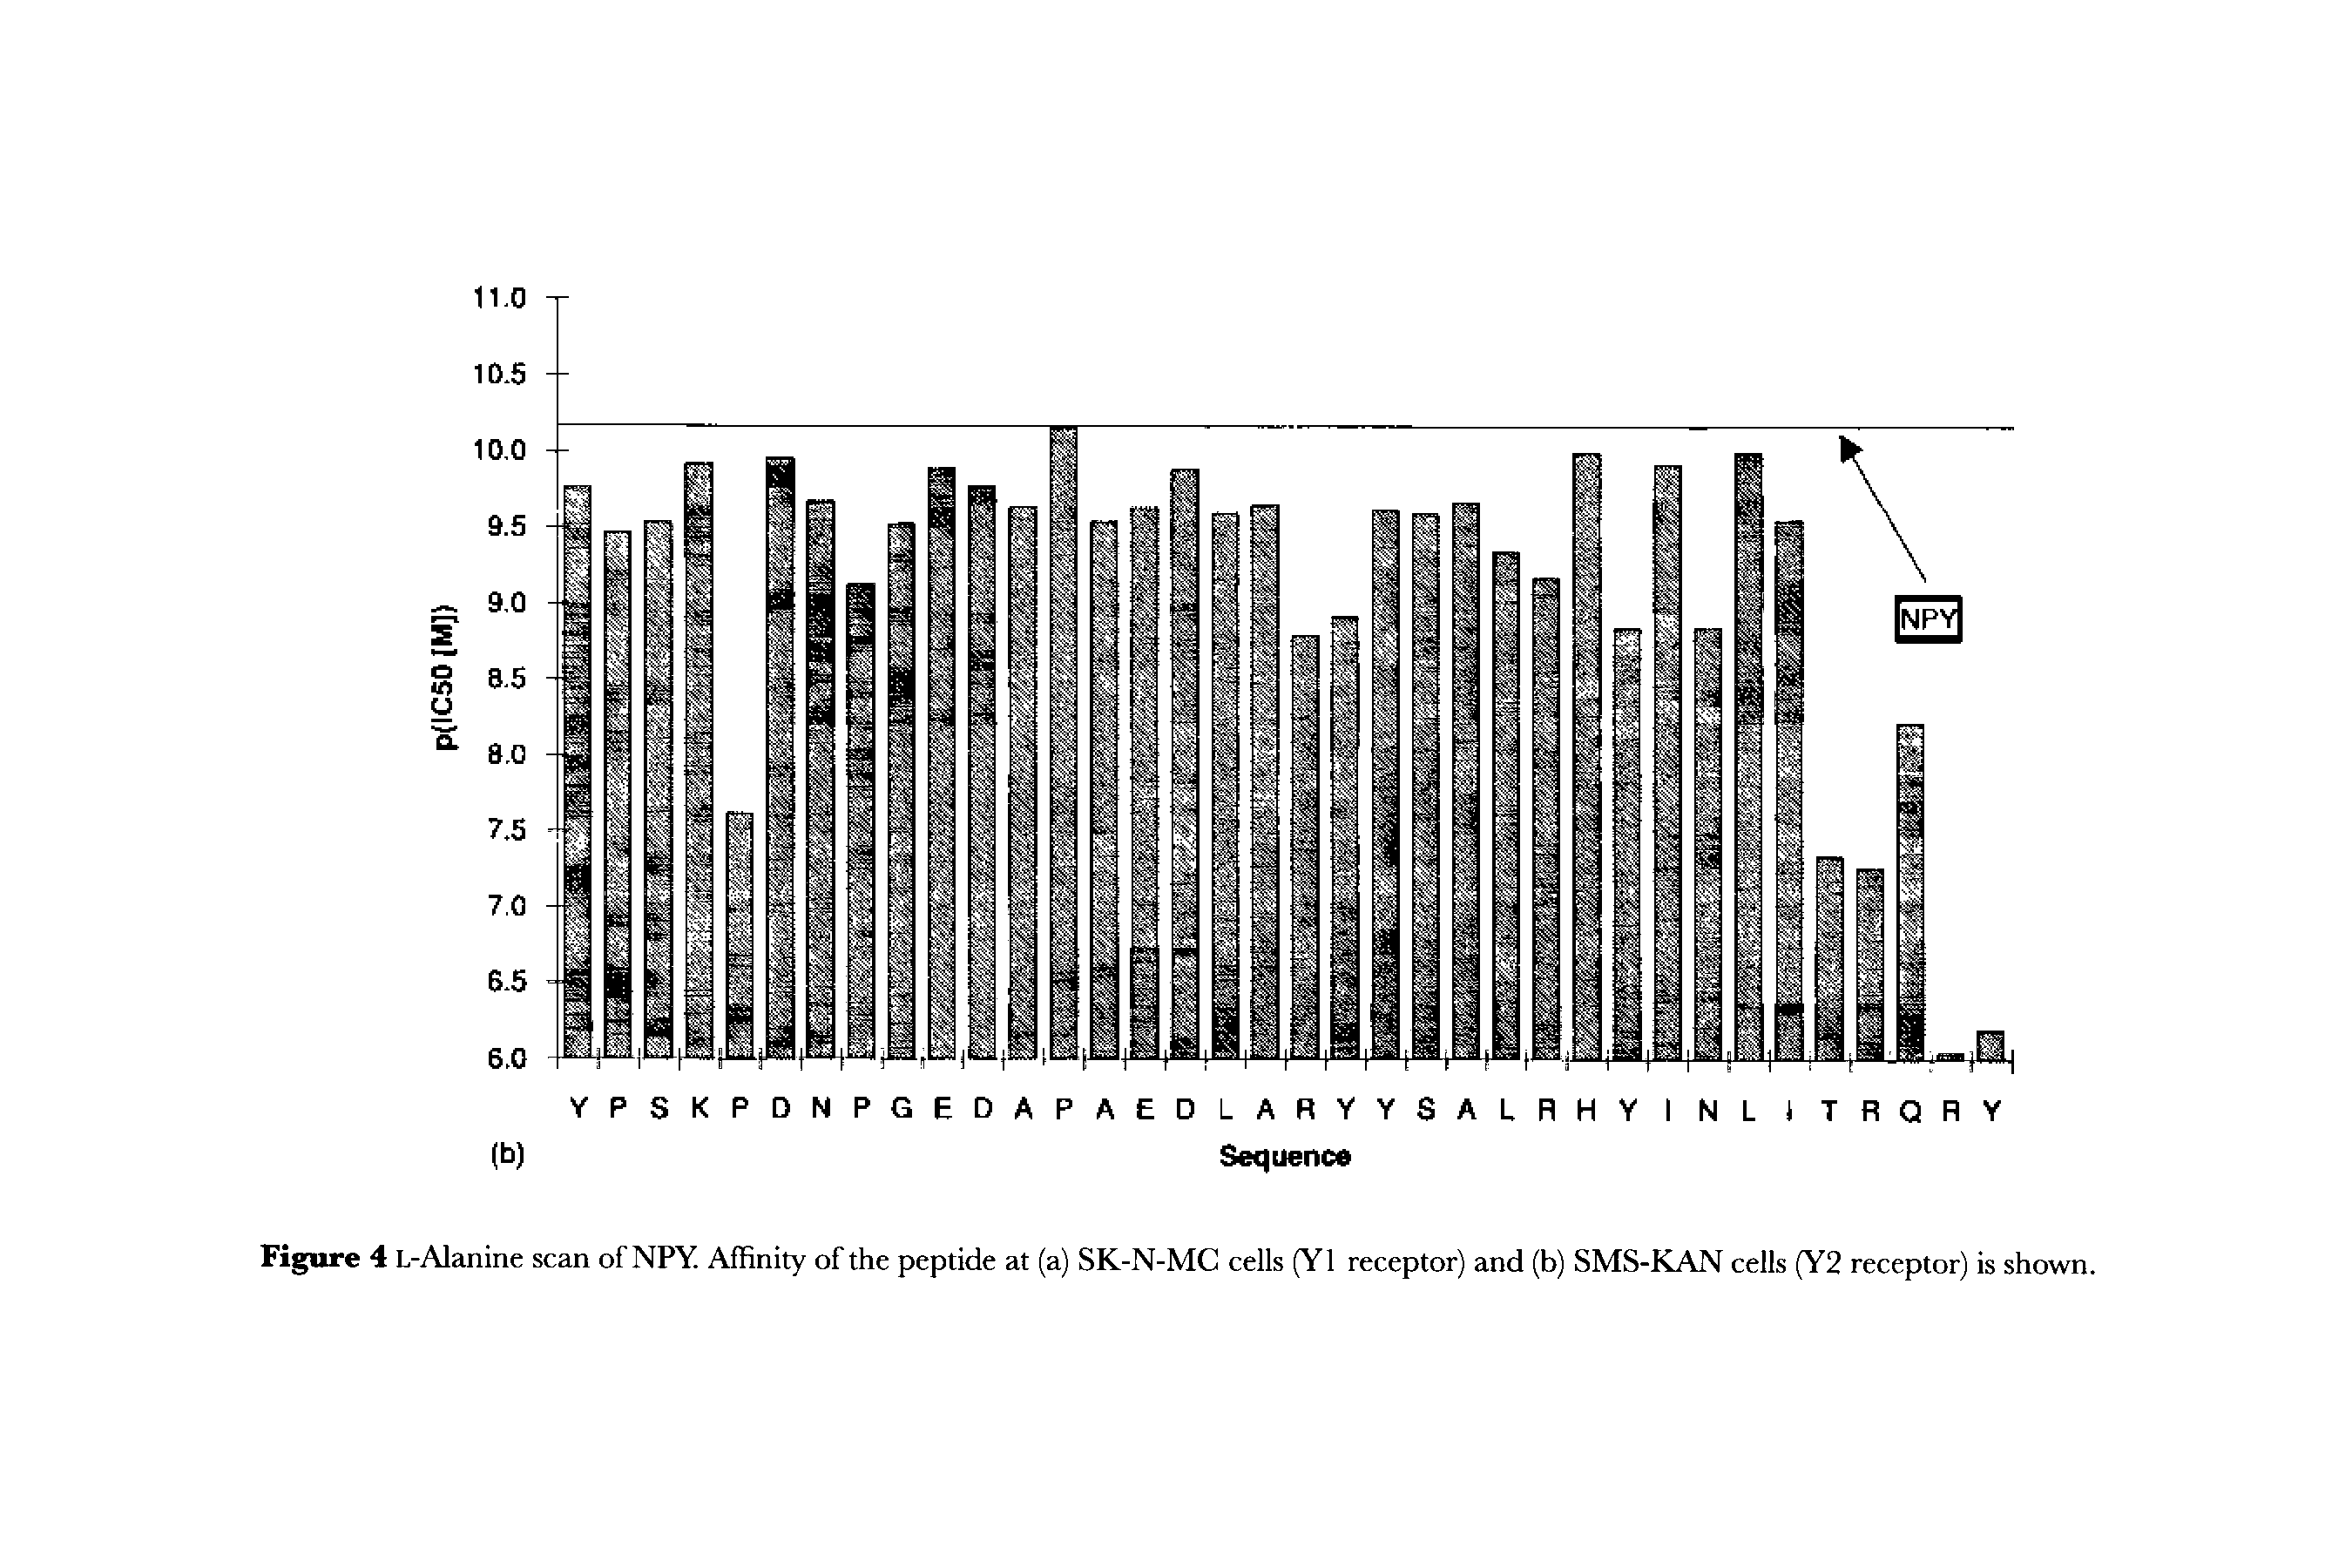 Figure 4 L-Alanine scan of NPY. Affinity of the peptide at (a) SK-N-MC cells (Y1 receptor) and (b) SMS-KAN cells (Y2 receptor) is shown.